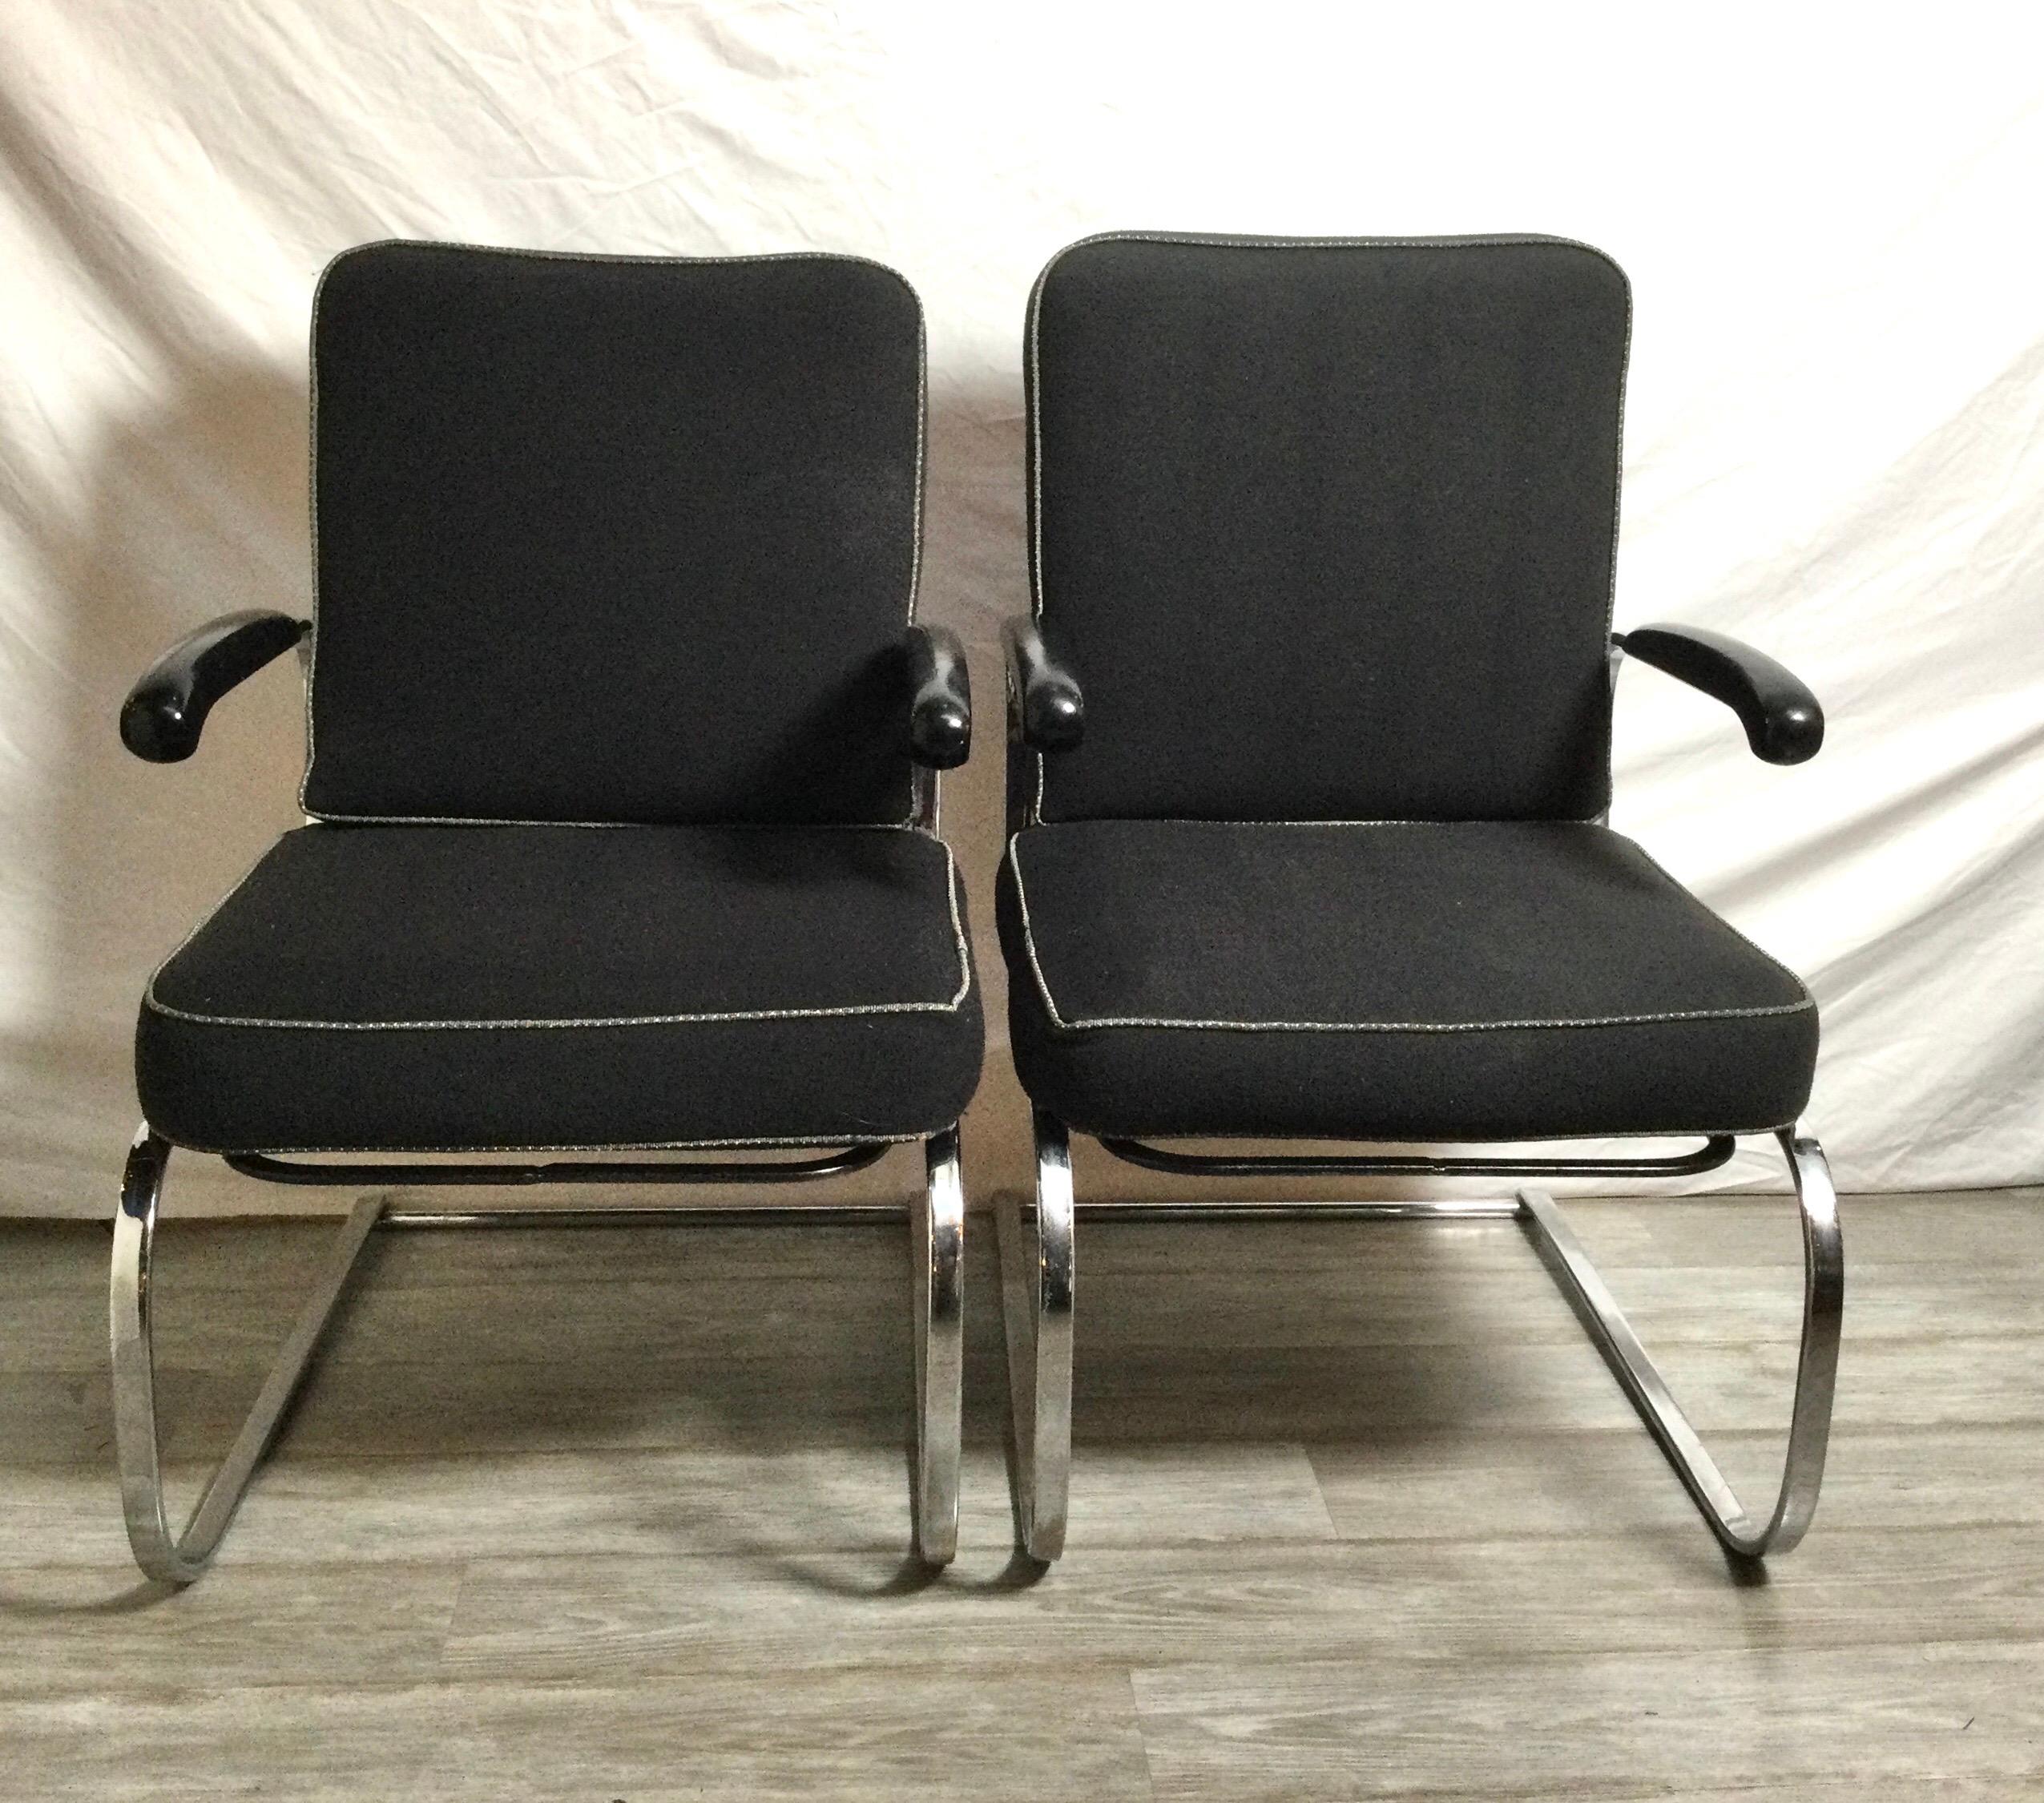 A Pair of 1930’s design chairs for the Troy Sunshade Company and is manufactured from Steel Tube, enameled wood and synthetic fabric.
All original, with some signs of age and use. 

Gilbert Rohde is amongst my very favorite American designers.